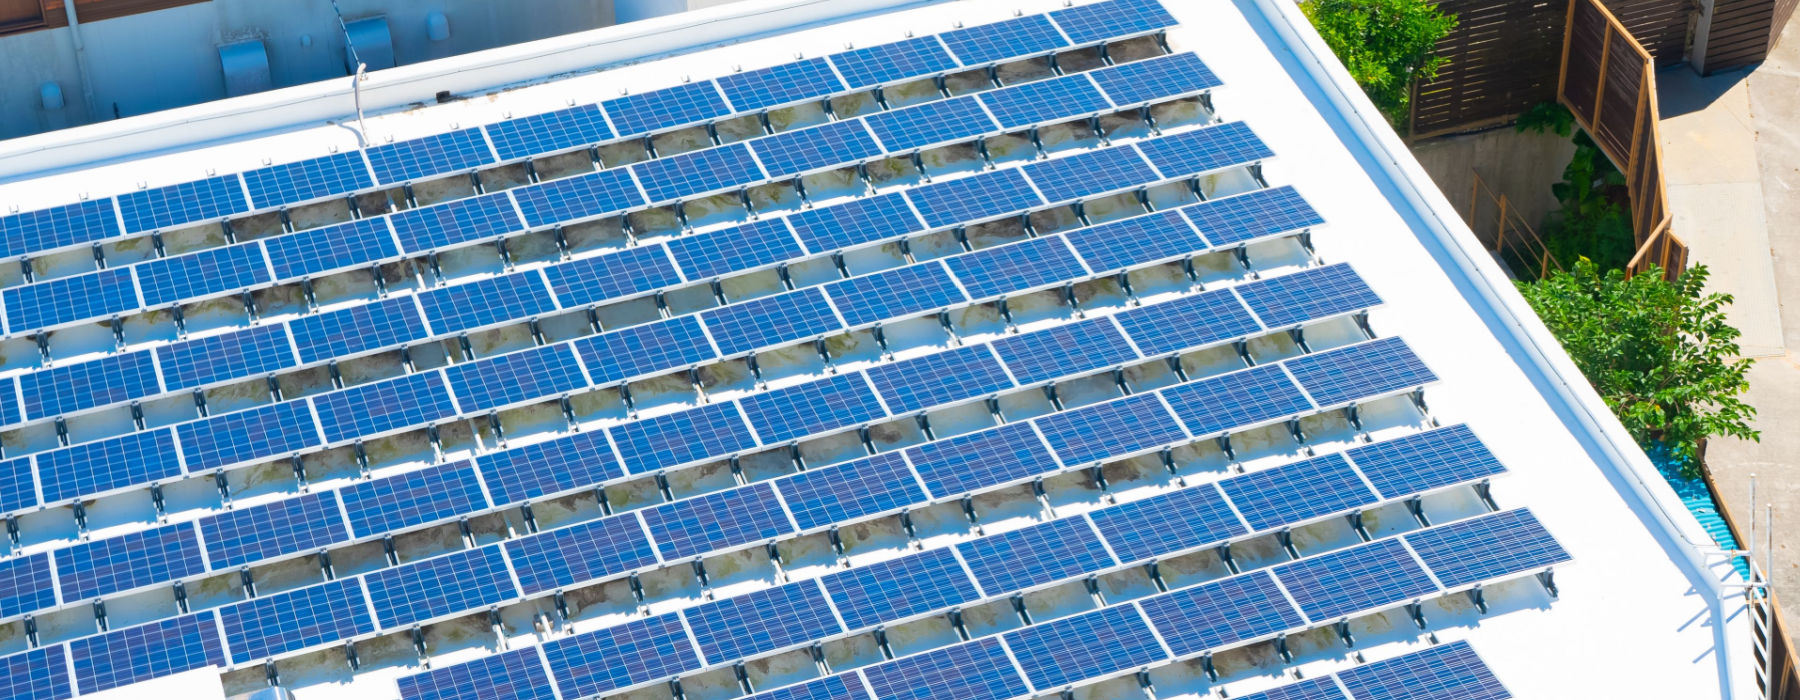 What Is a Solar PV System and How Does It Save on Energy Bills?